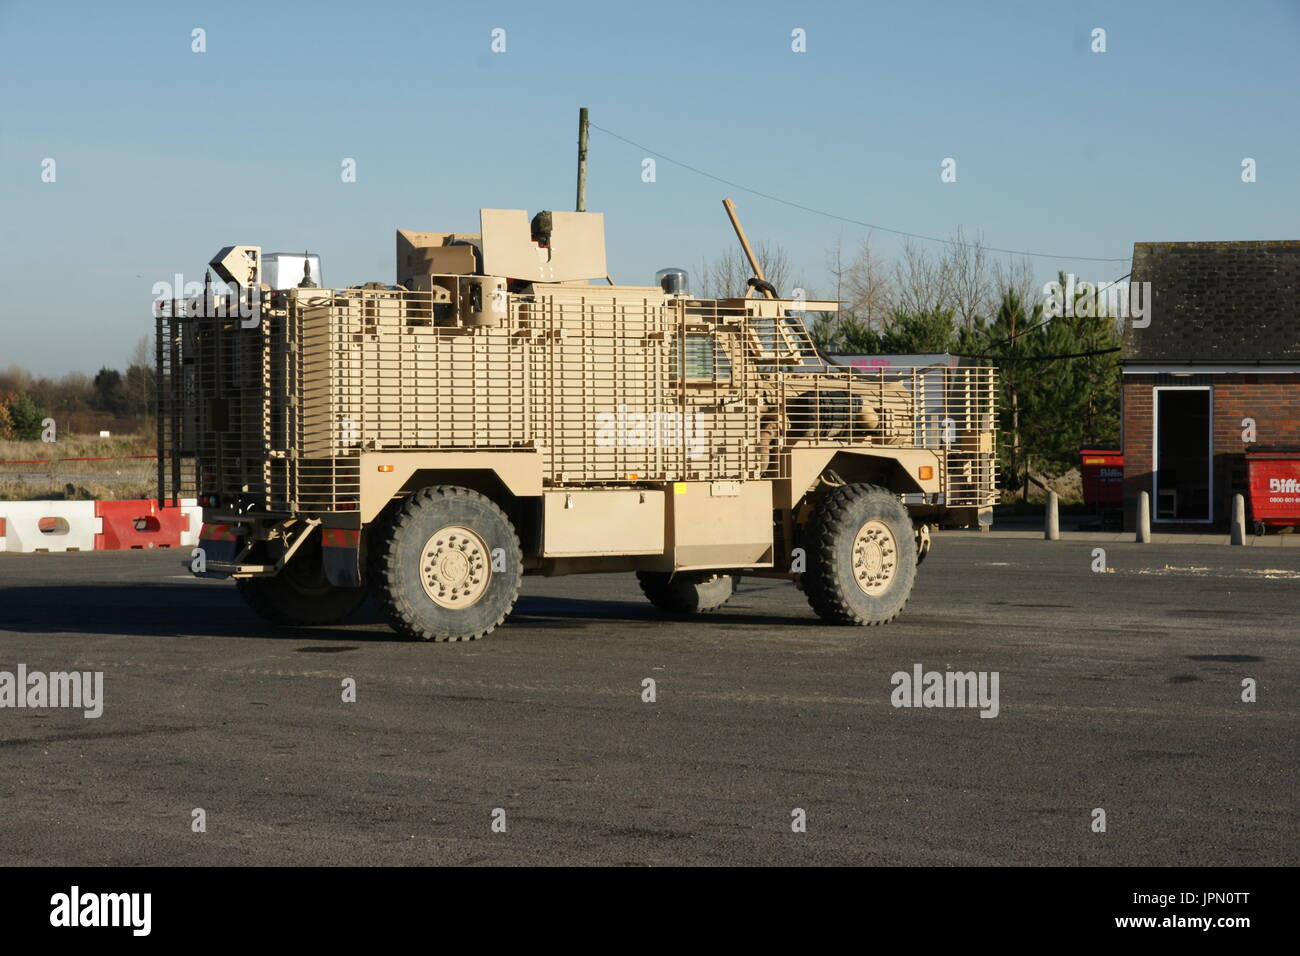 Mastiff, Ridgback armoured personnel carrier Stock Photo